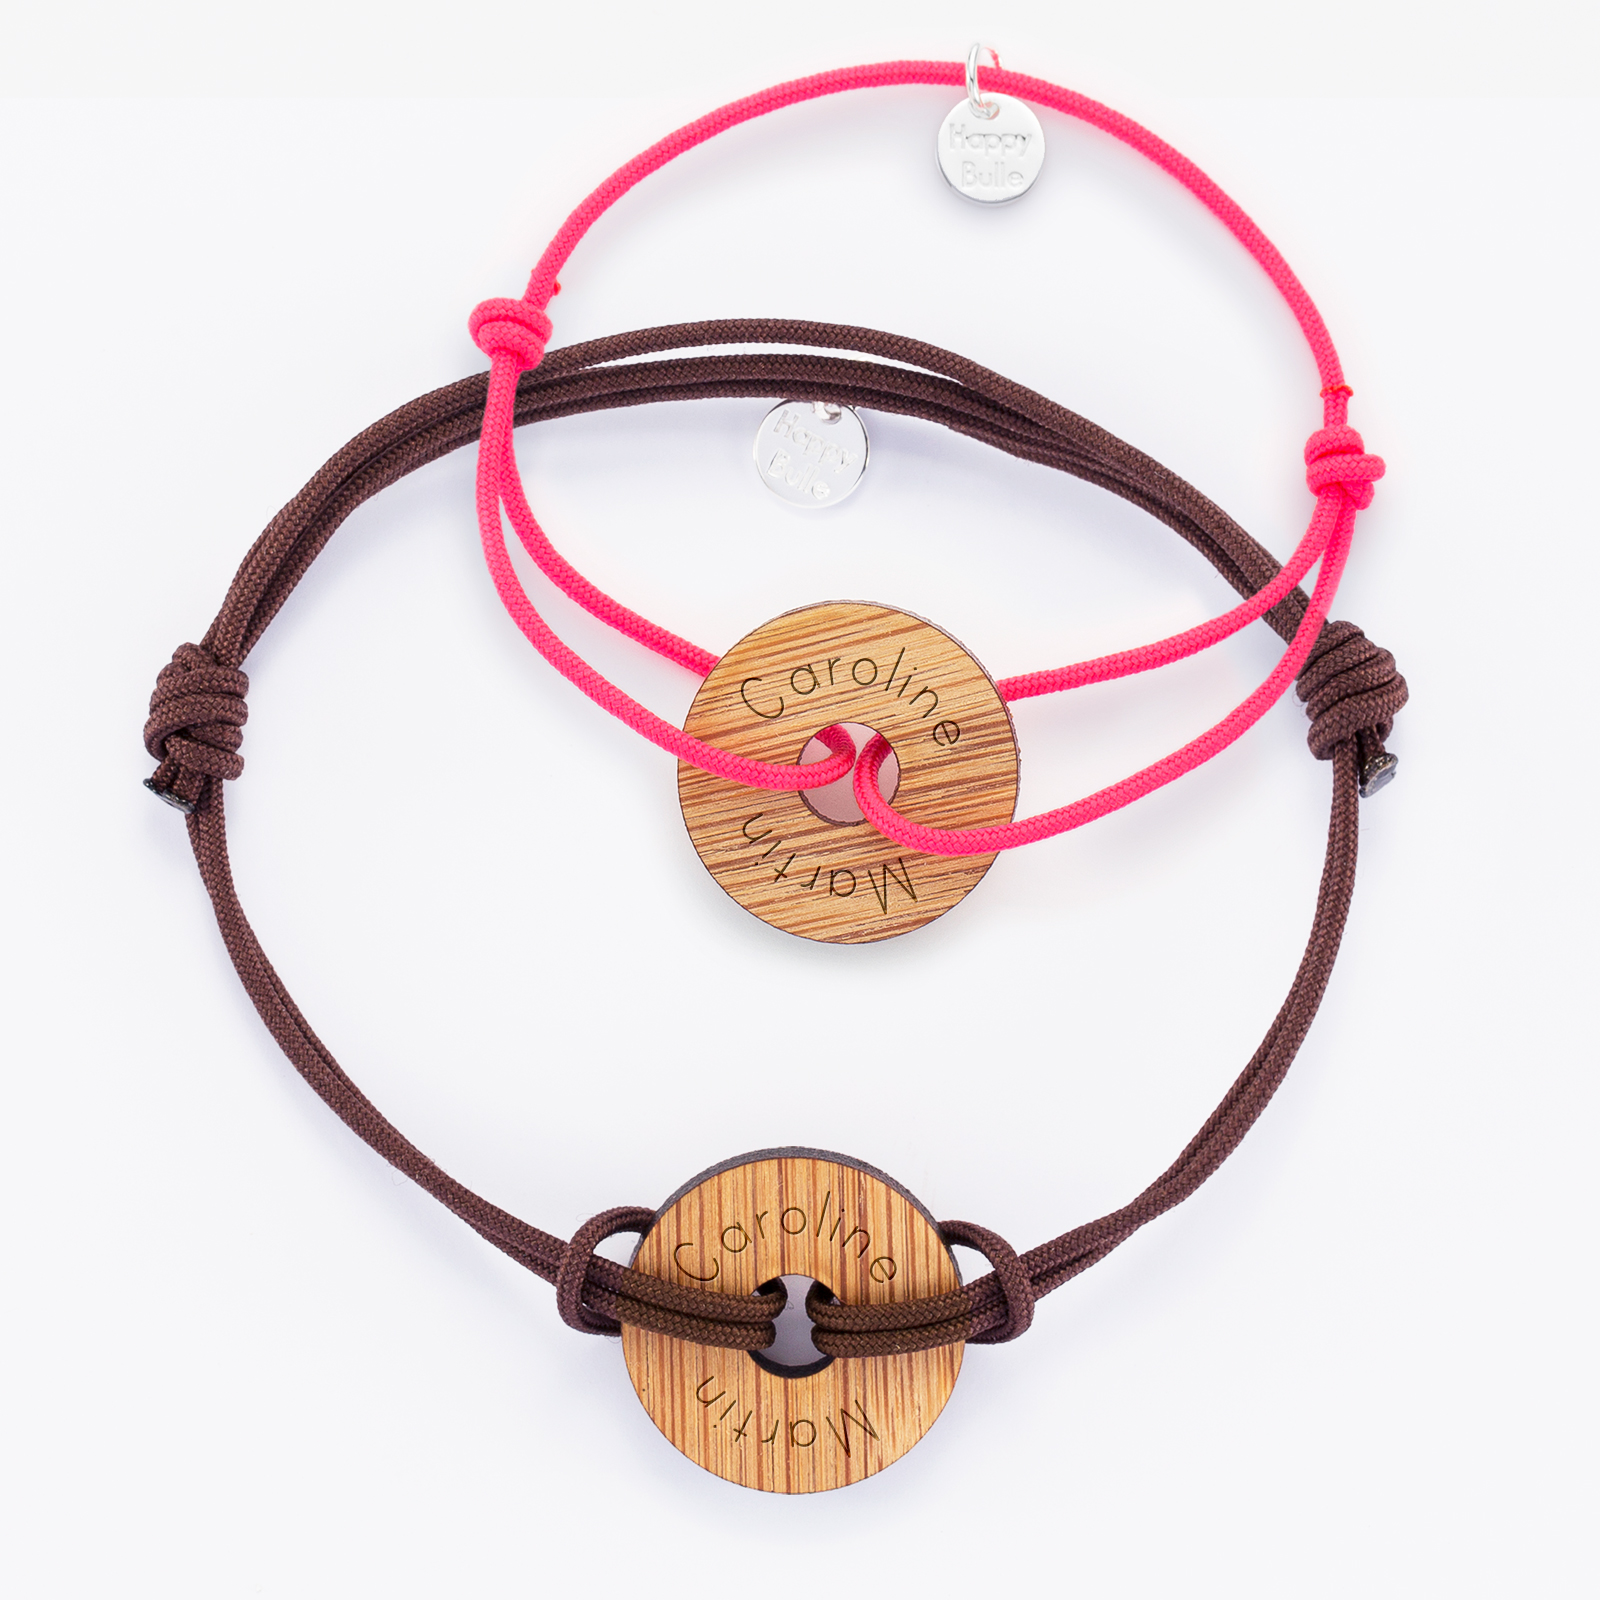 Pair of personalised bracelets with engraved target wooden medallions 21mm name